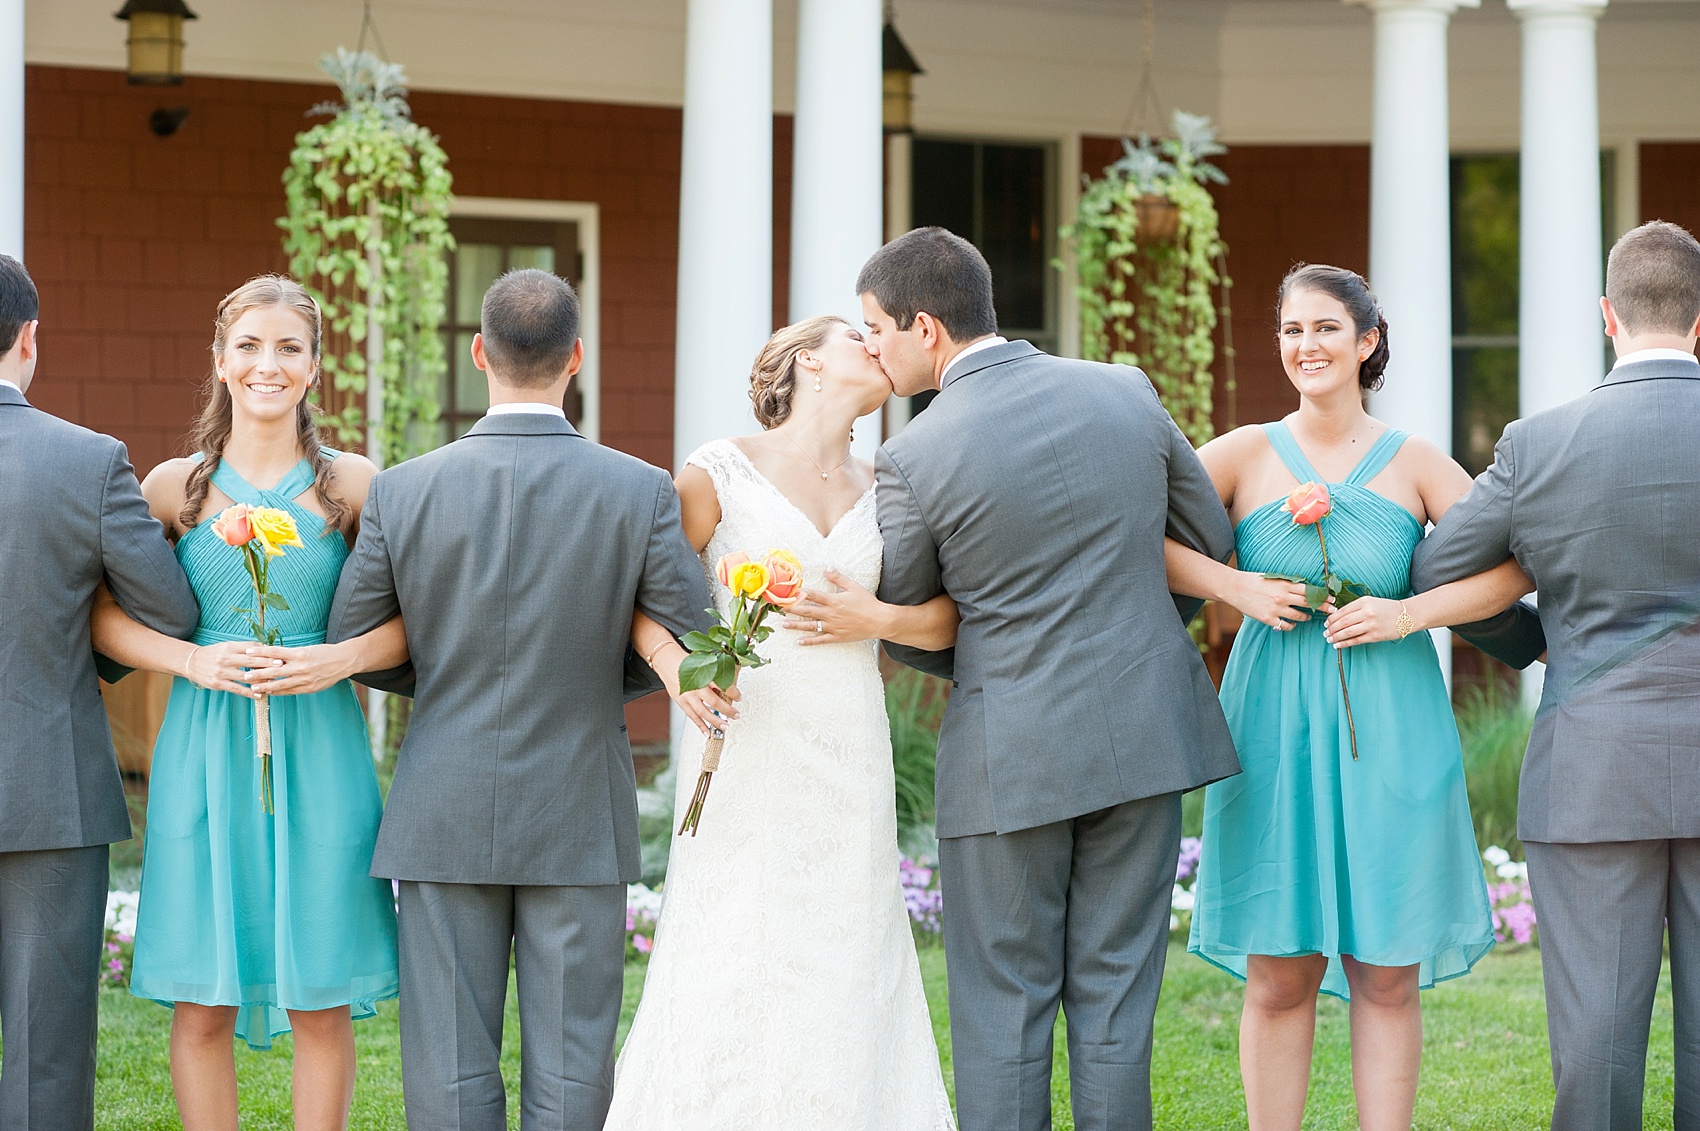 Wedding party in teal dresses and grey suits for a Hollow Brook Golf Club wedding in New York. Photos by Mikkel Paige Photography.